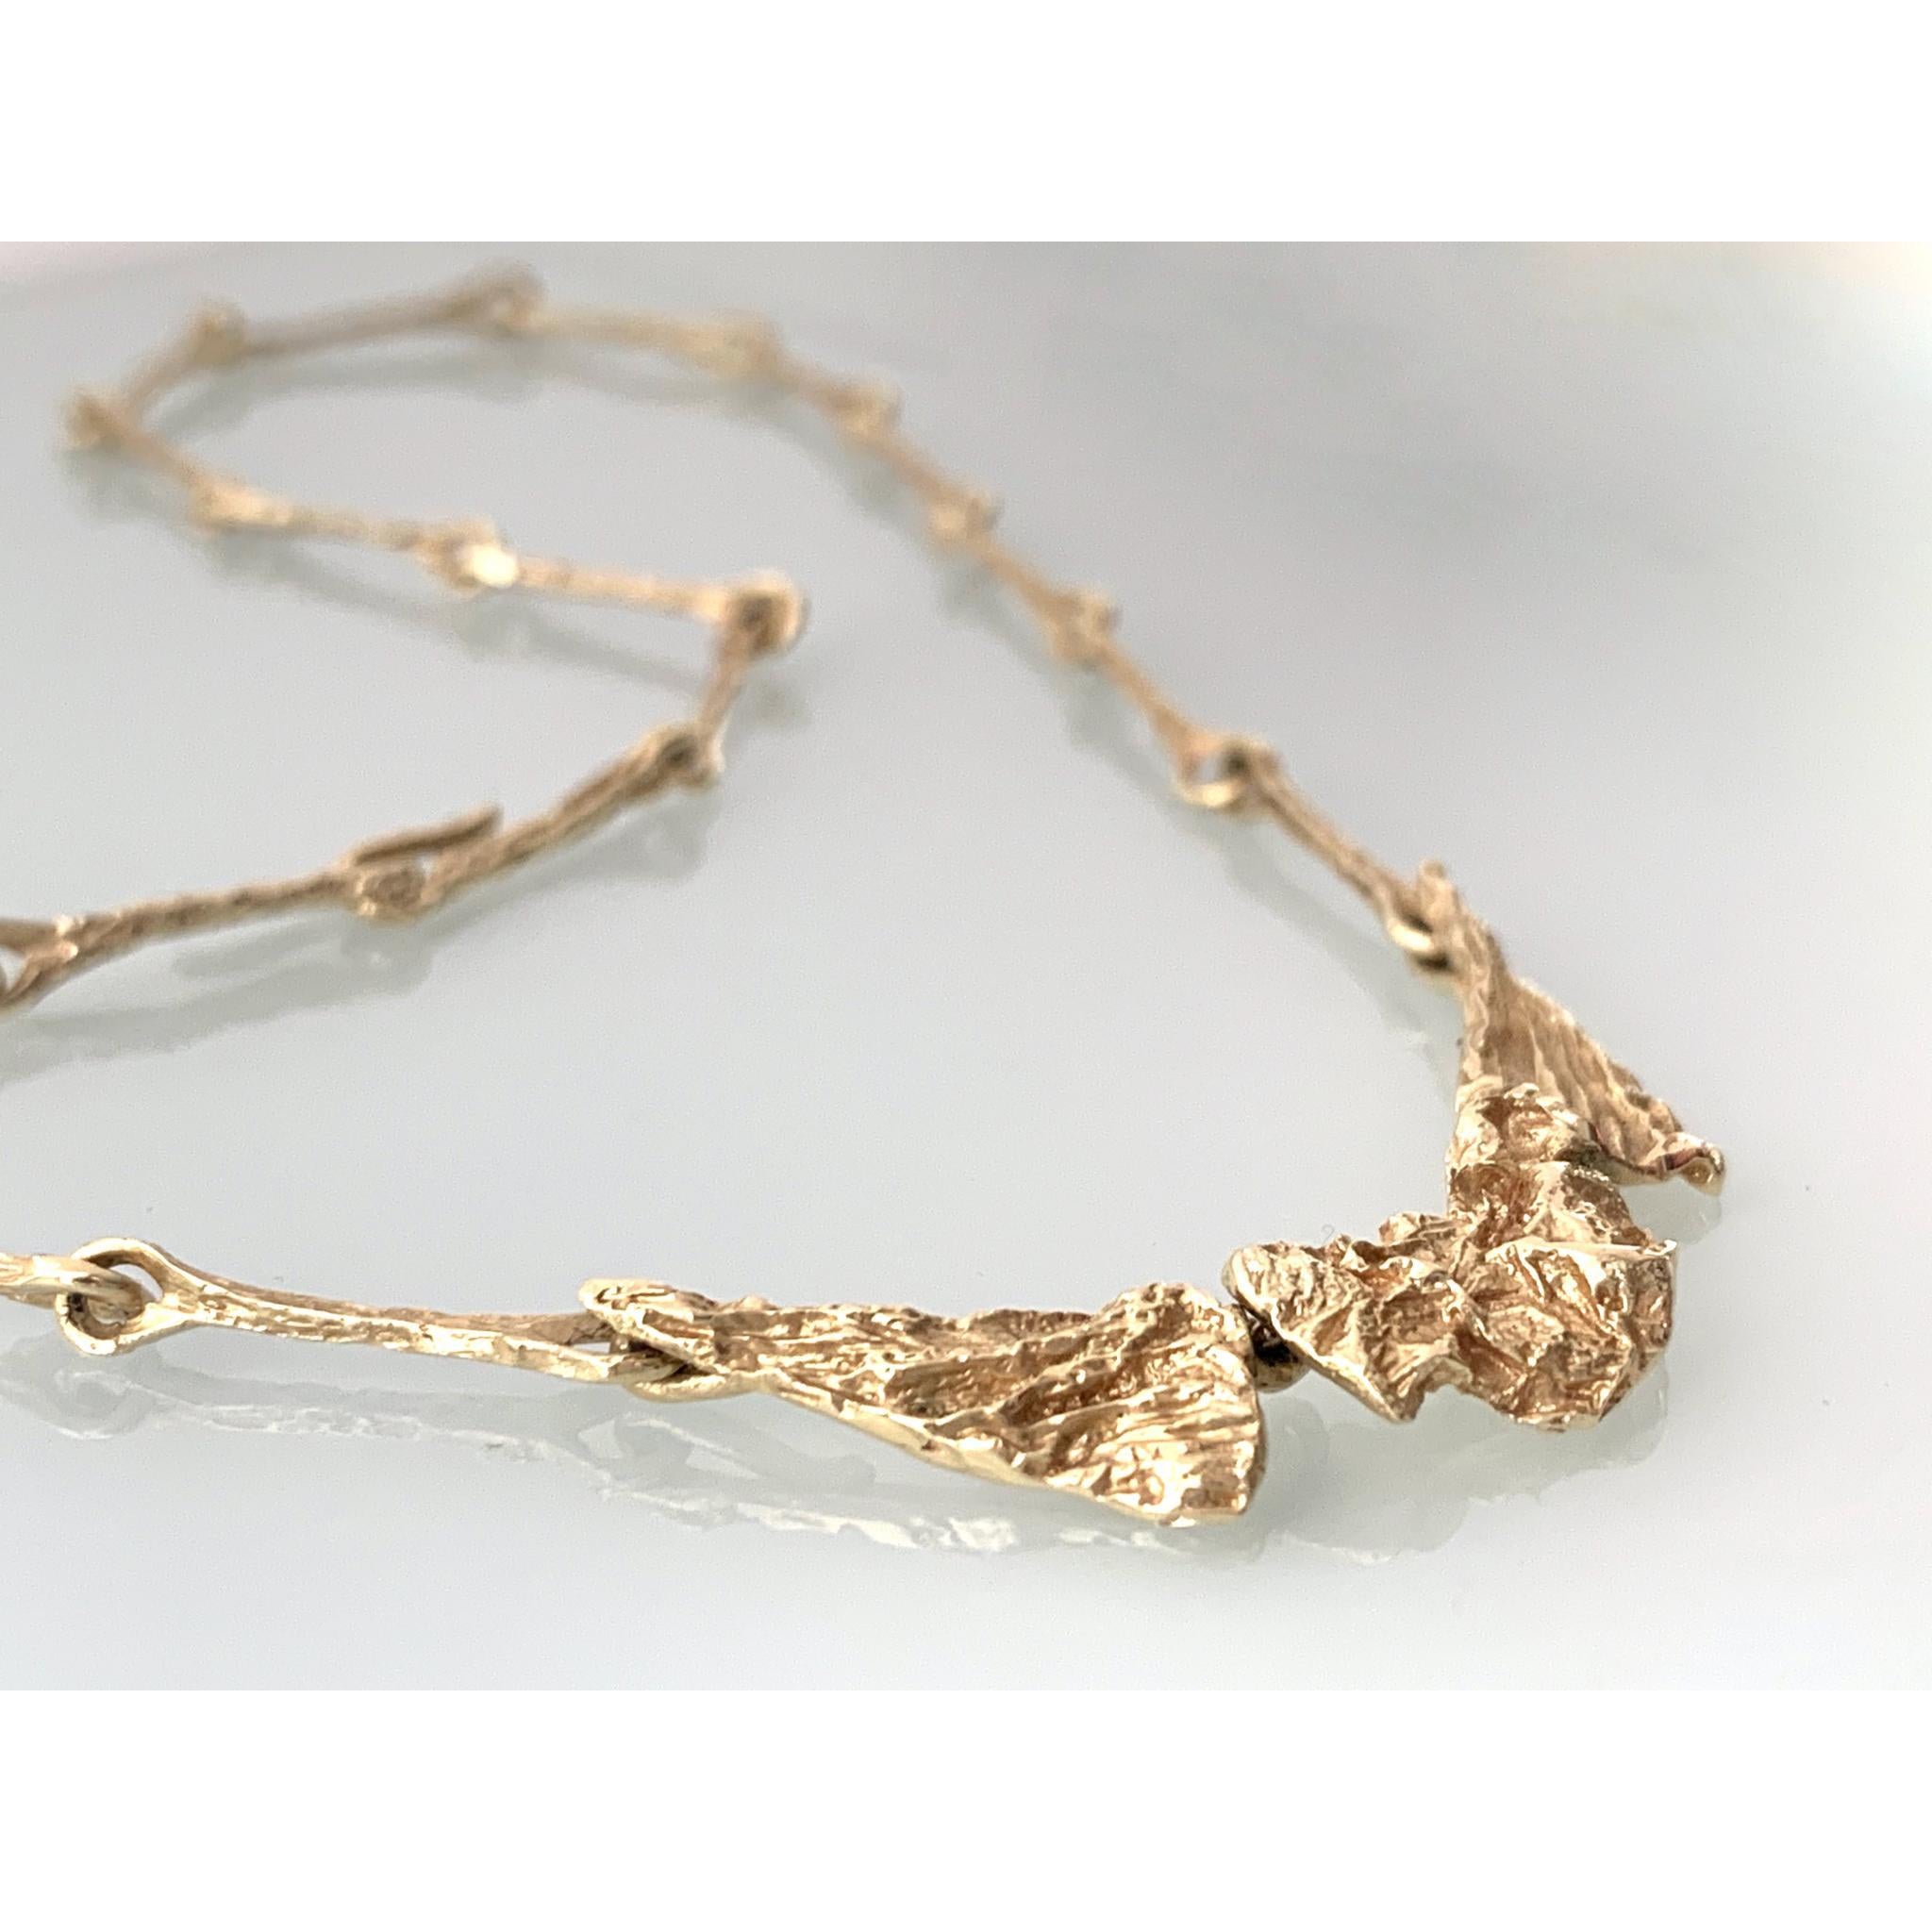 Rare 14 carat Gold Brutalist necklace 
by Danish Designer Harry Askel Norgaard
Stamped HAN 585
Segmented front section depicting a naturally formed surface
lead by long links in a complementing design 
that has strong hook fastening of continuation